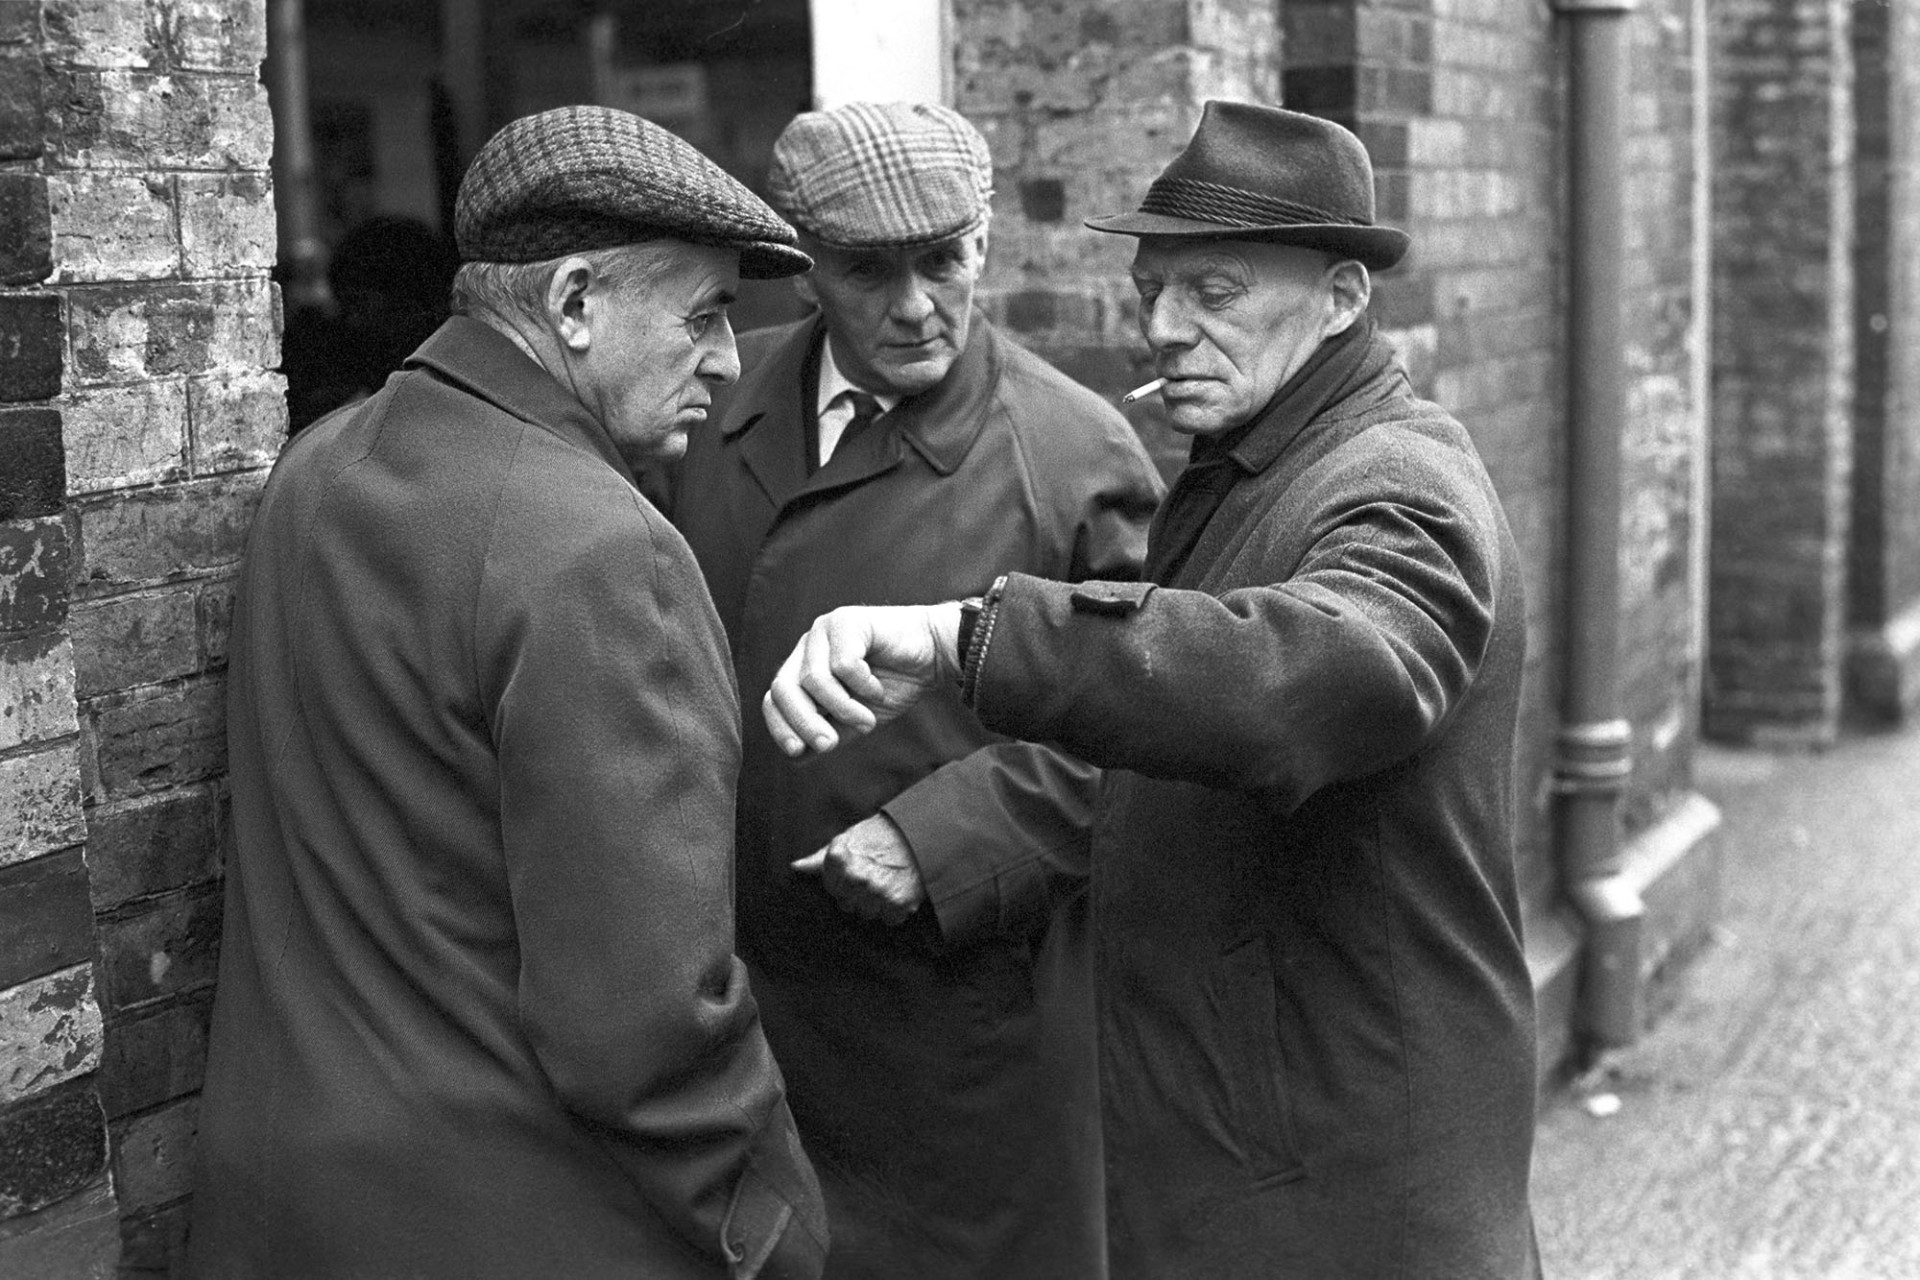 Three men chatting in street.
[Three men talking outside Barnstaple Pannier Market.  One of the men is smoking a cigarette and checking his watch.]